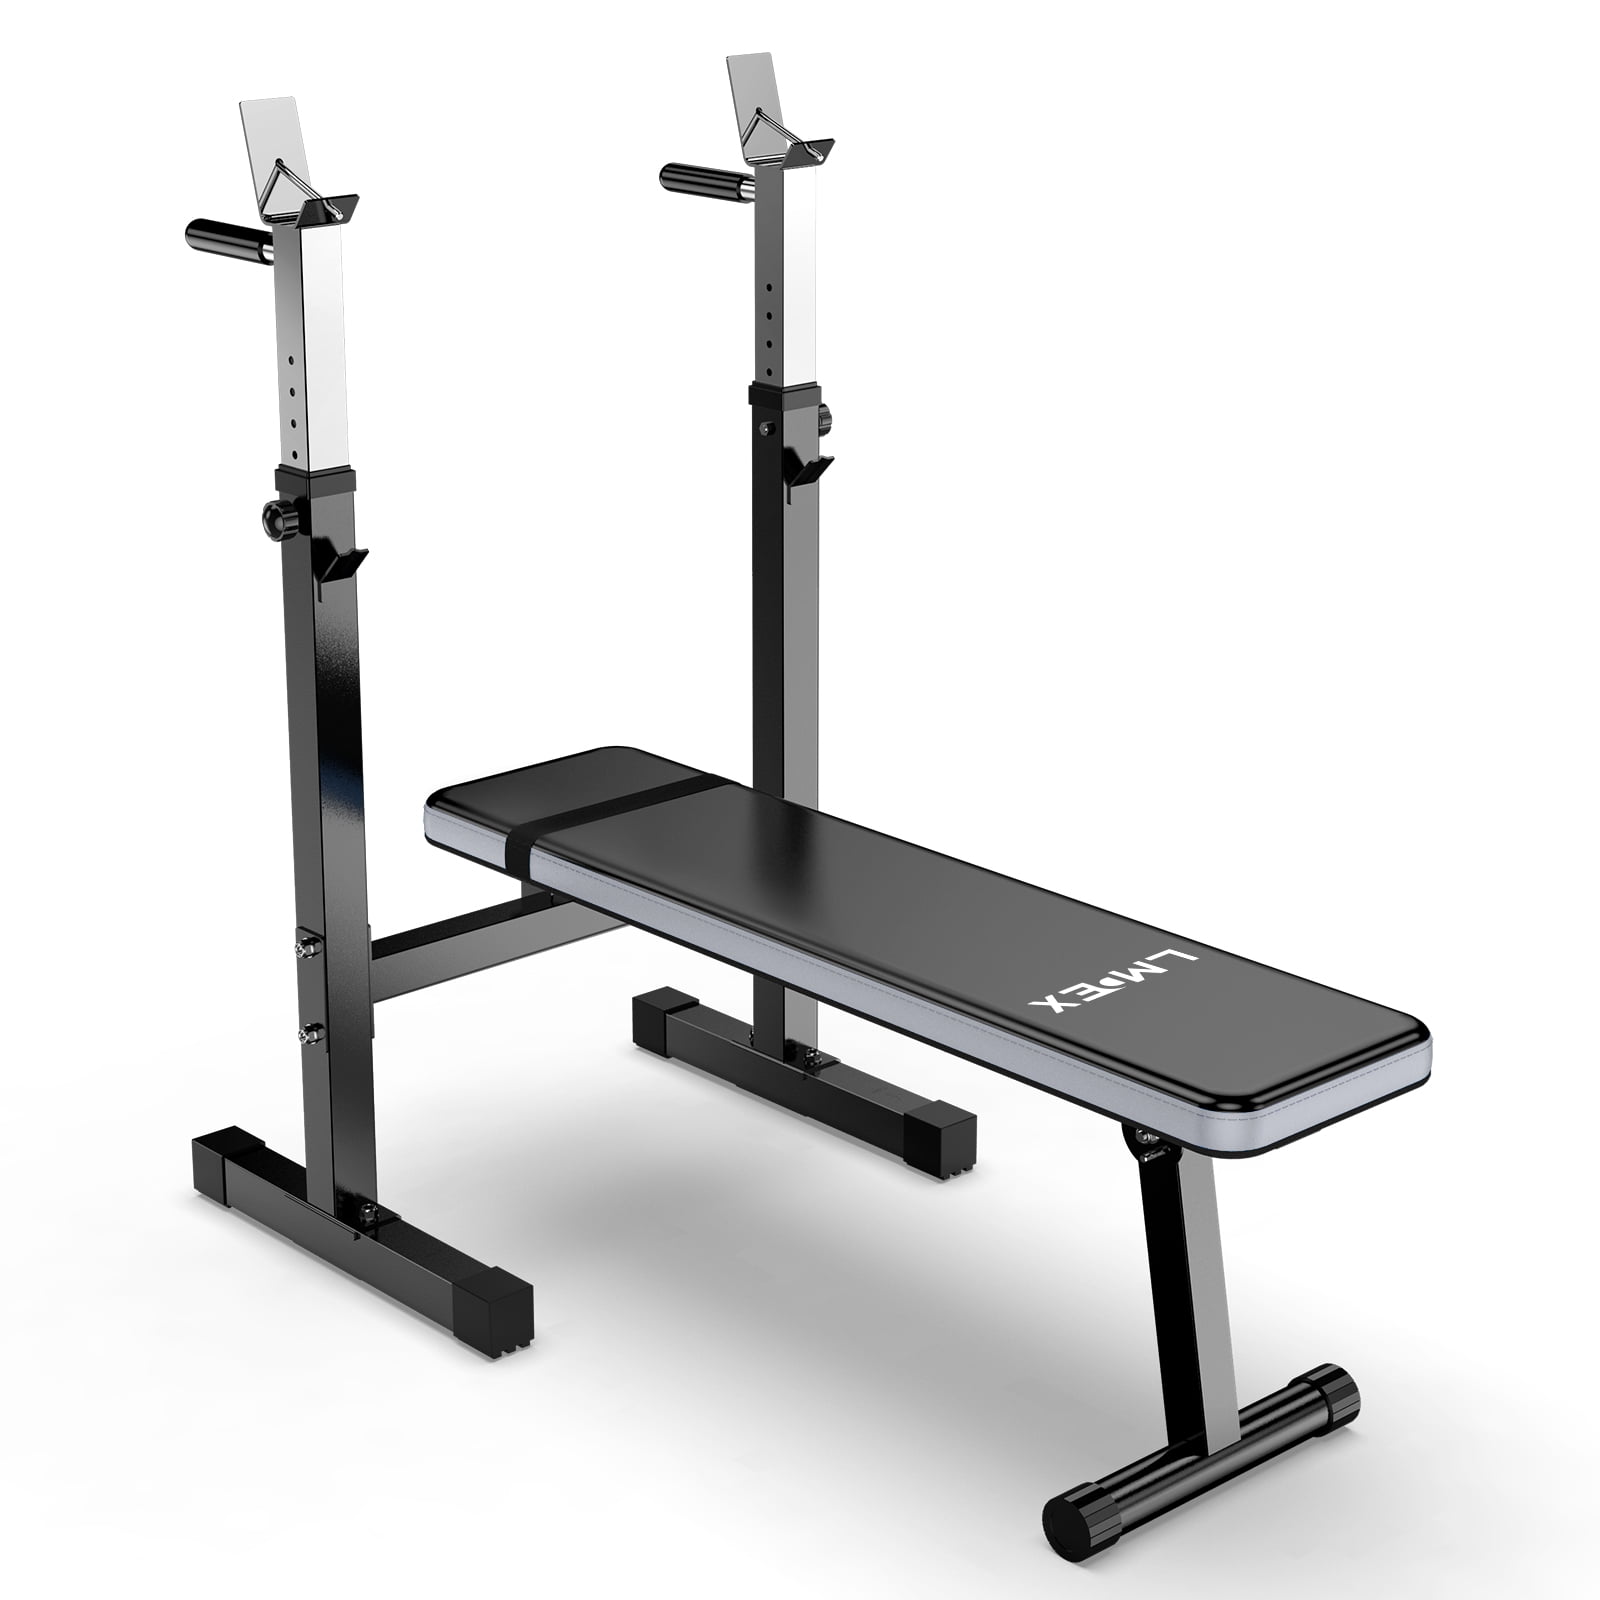 LMDEX Adjustable Weight Bench Folding Fitness Barbell Rack for Full Body  Workout Incline & Decline Capability Home Gym Strength